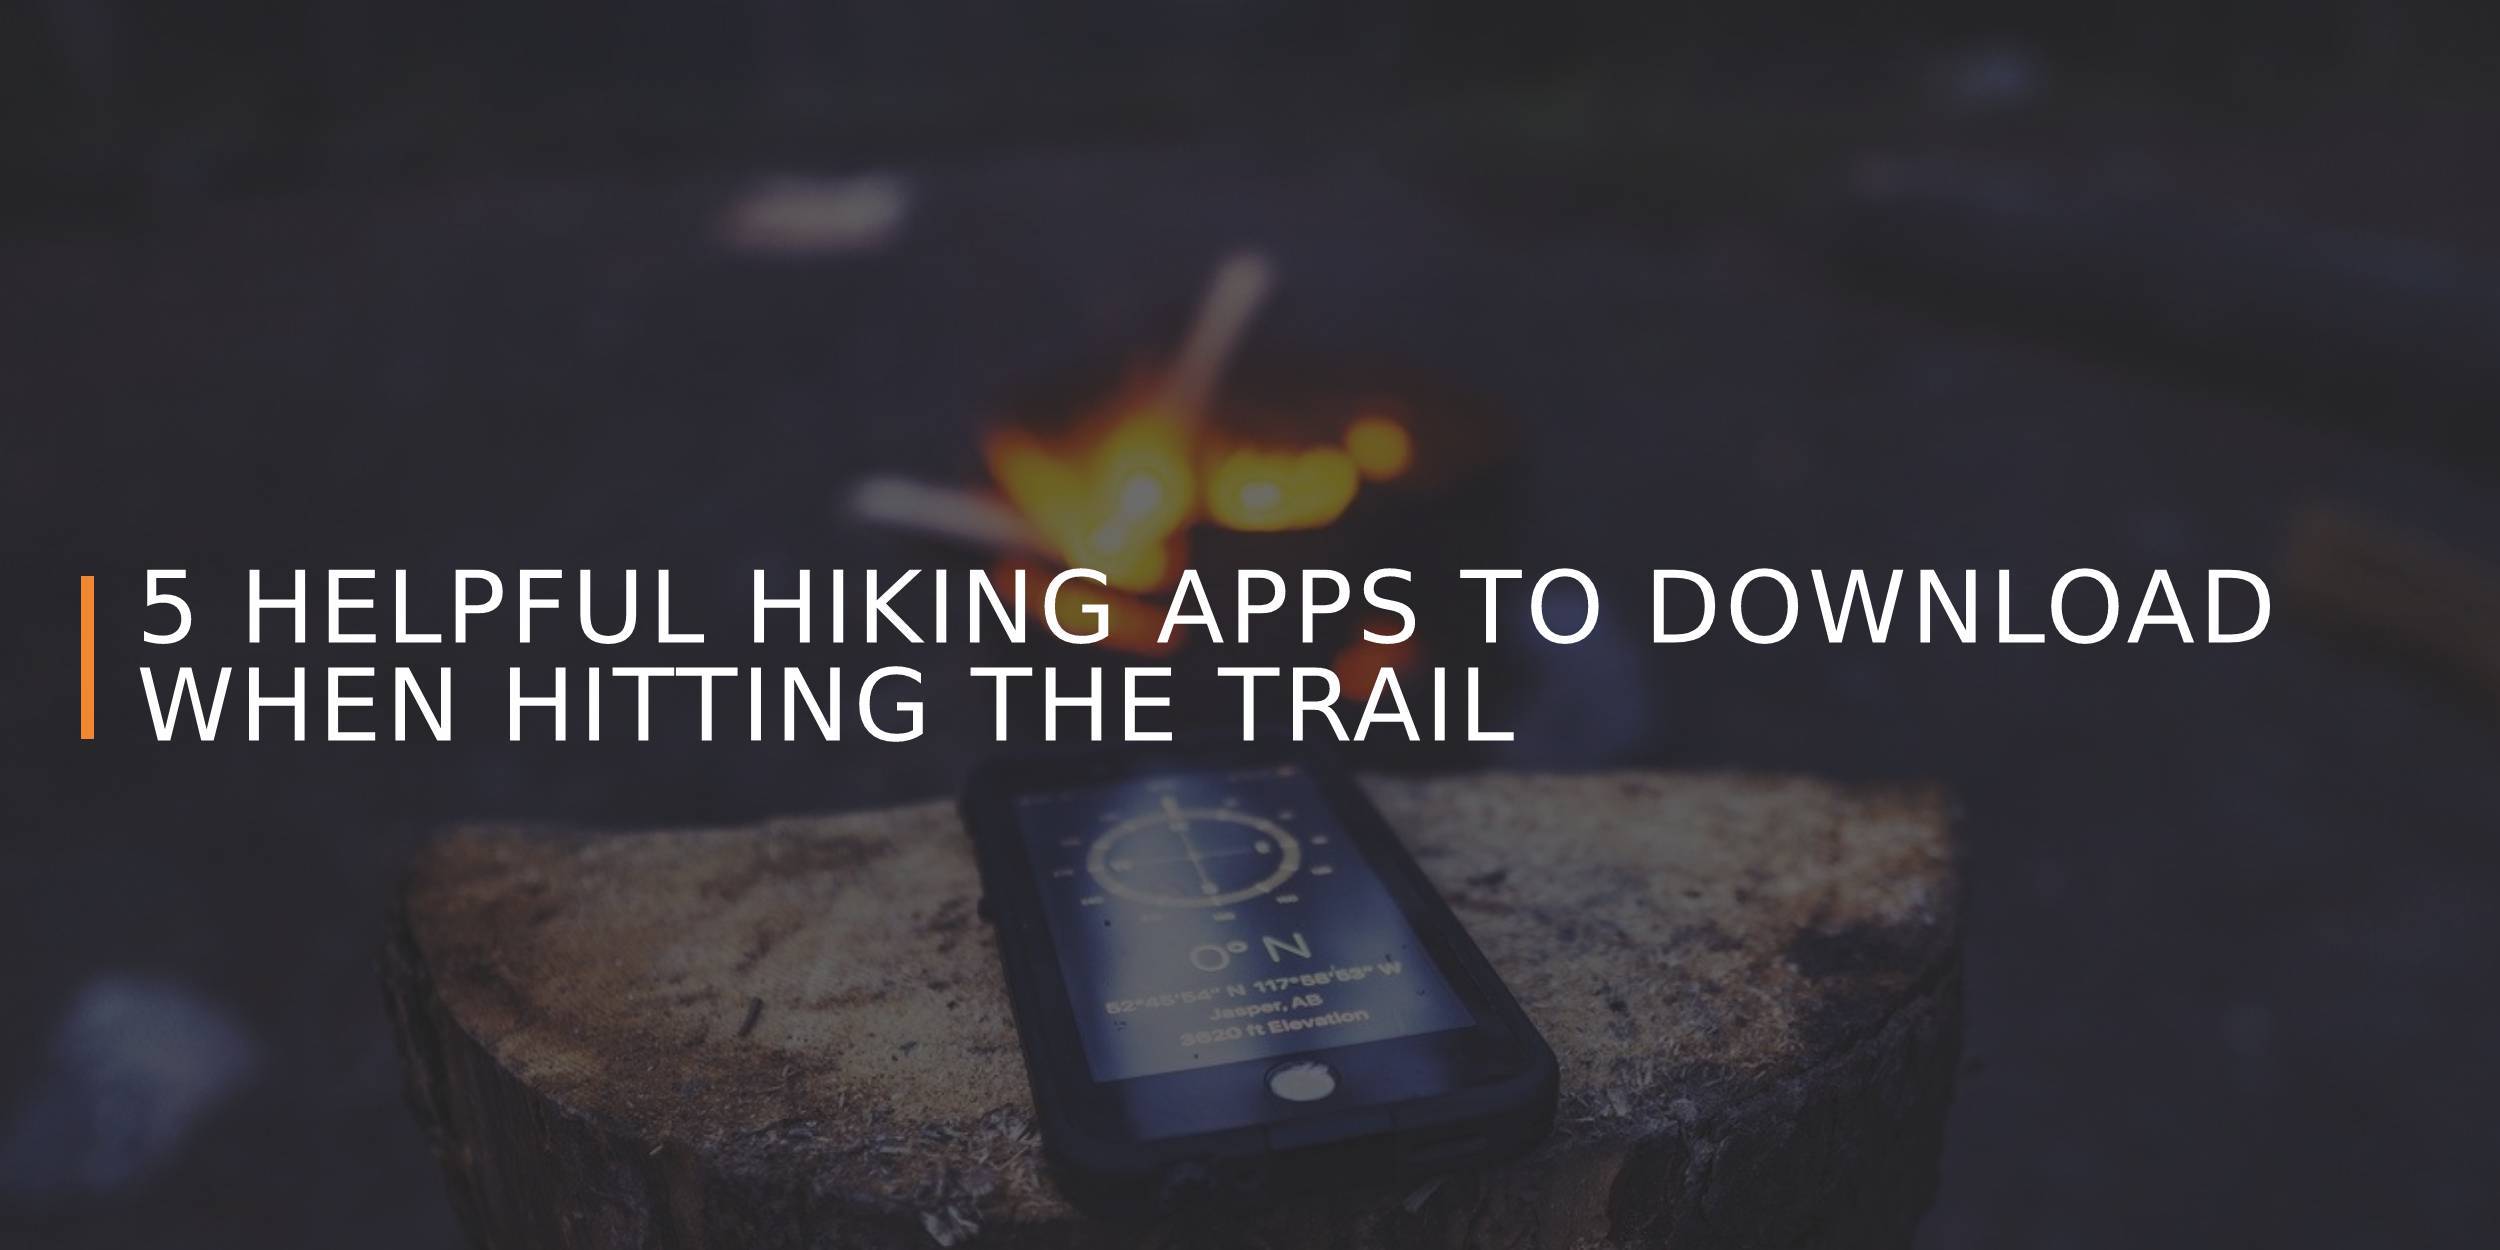 5 Helpful Hiking Apps to Download When Hitting the Trail